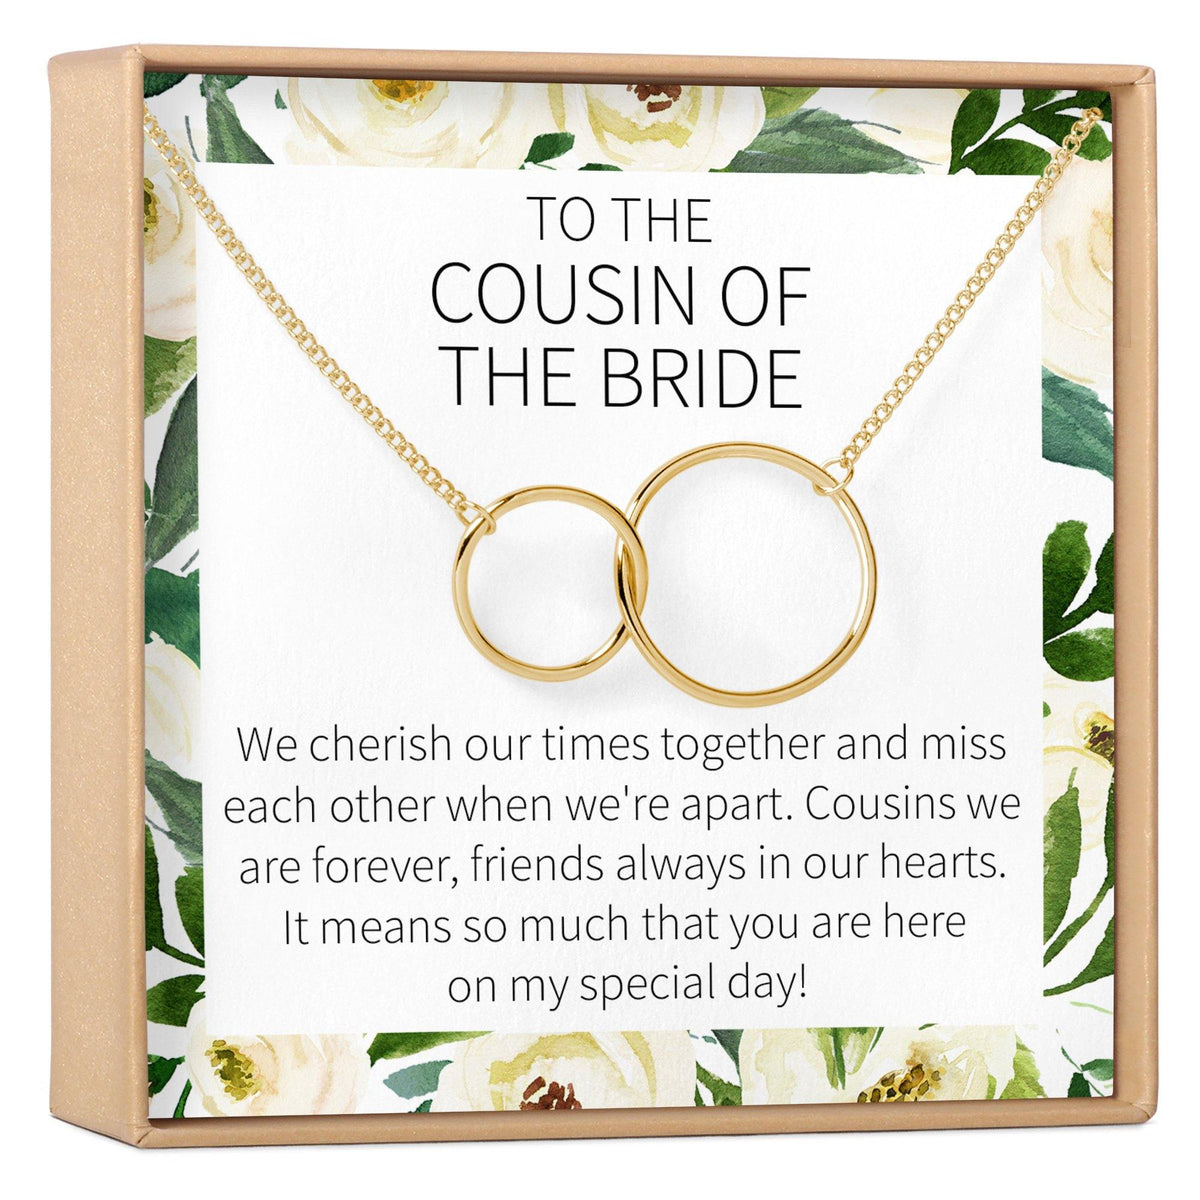 Cousin of the Bride Necklace - Dear Ava, Jewelry / Necklaces / Pendants